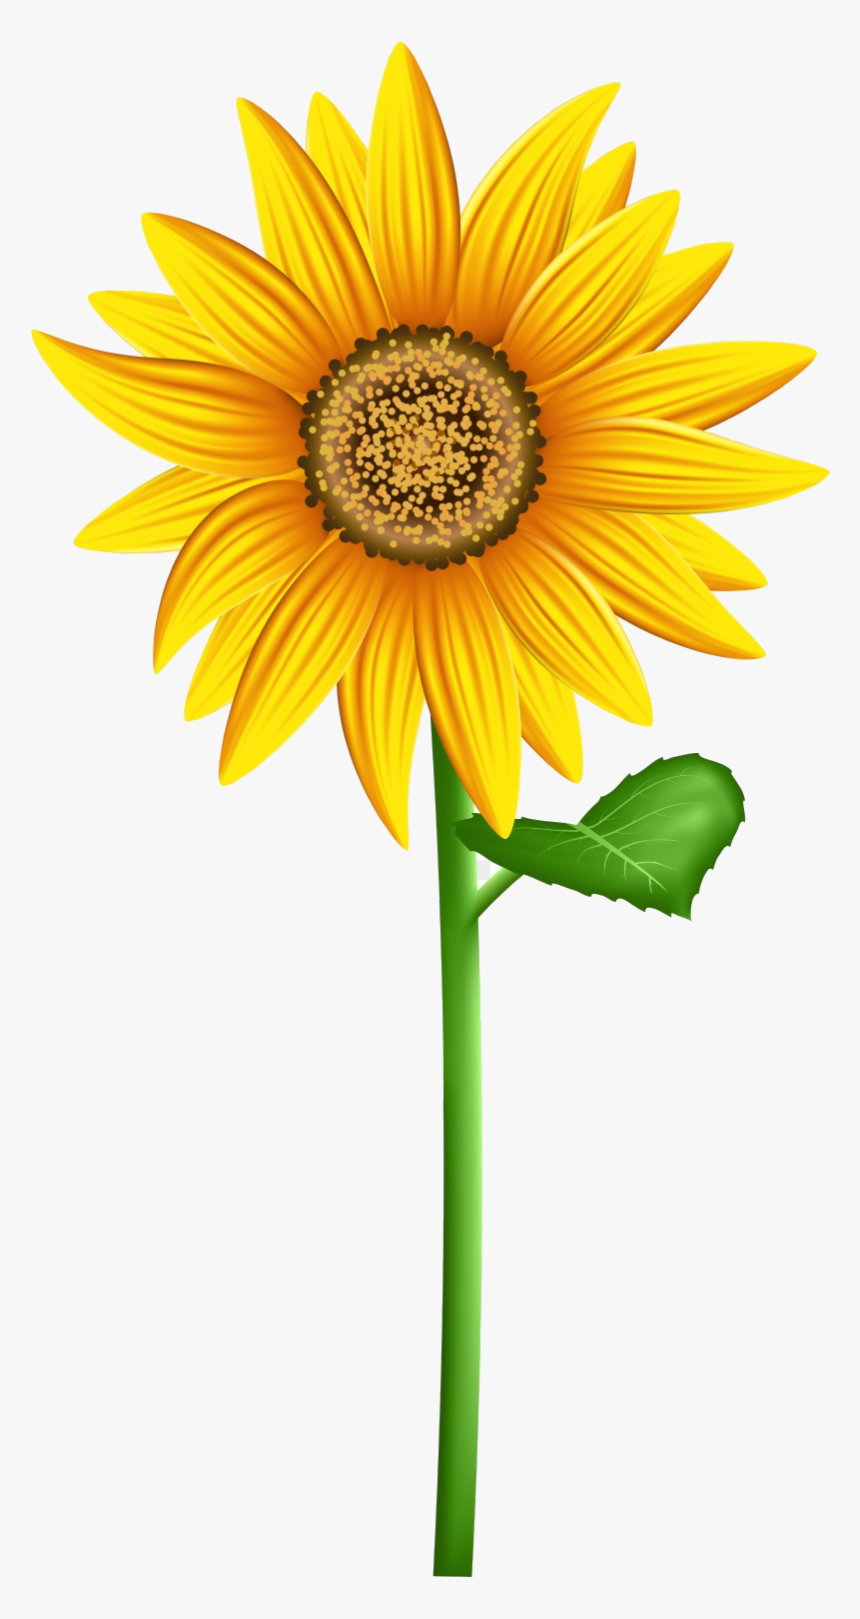 Sunflower Transparent Background Clipart Png - Transparent Background Sunflower Clipart, Png Download, Free Download